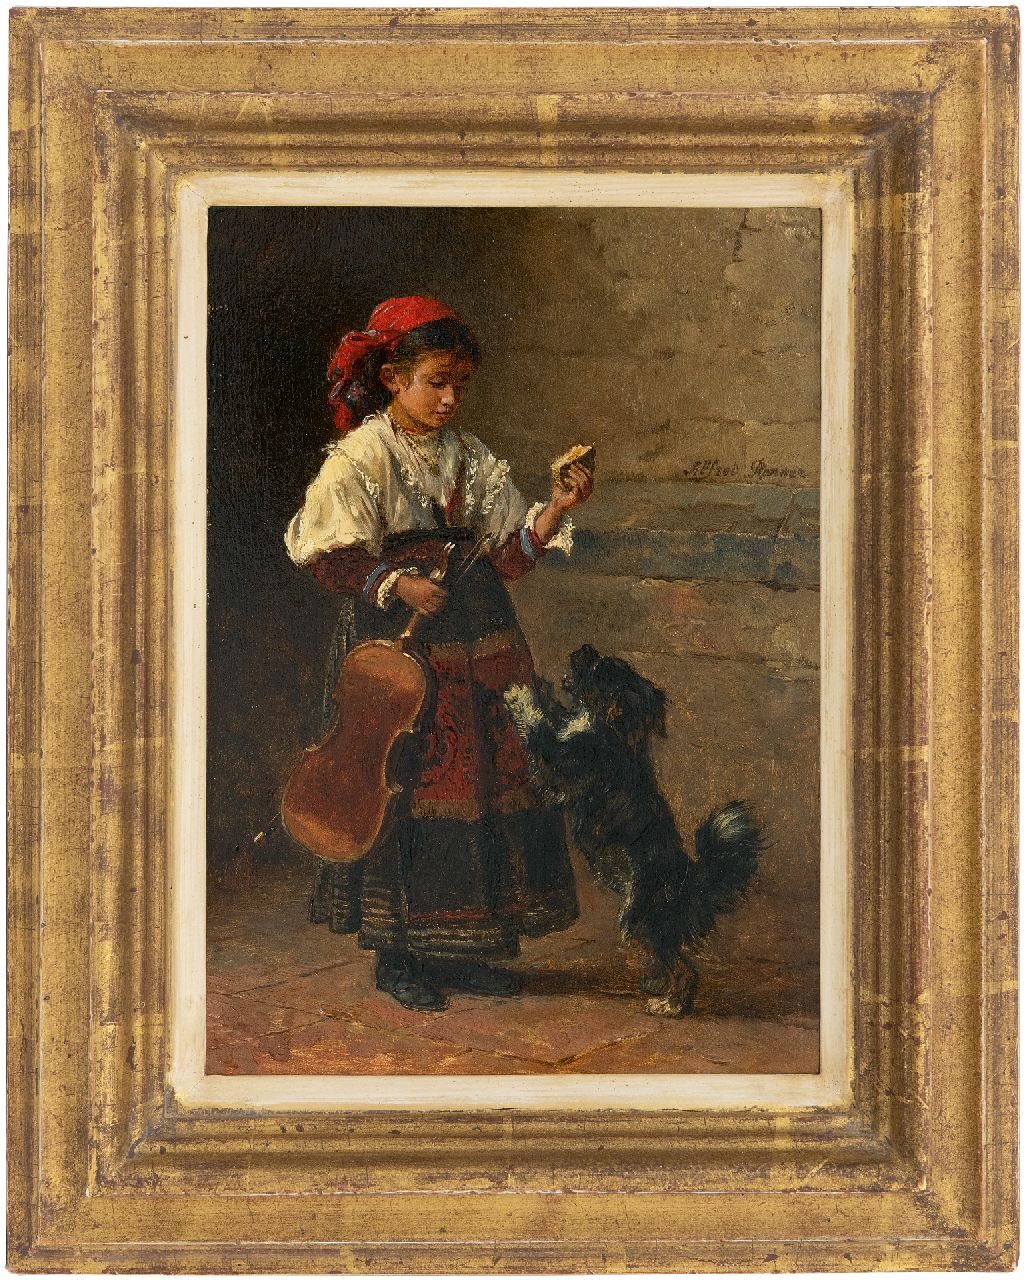 Ronner A.  | Alfred Ronner, Gypsy girl with her dog, oil on panel 24.7 x 17.7 cm, signed c.r.